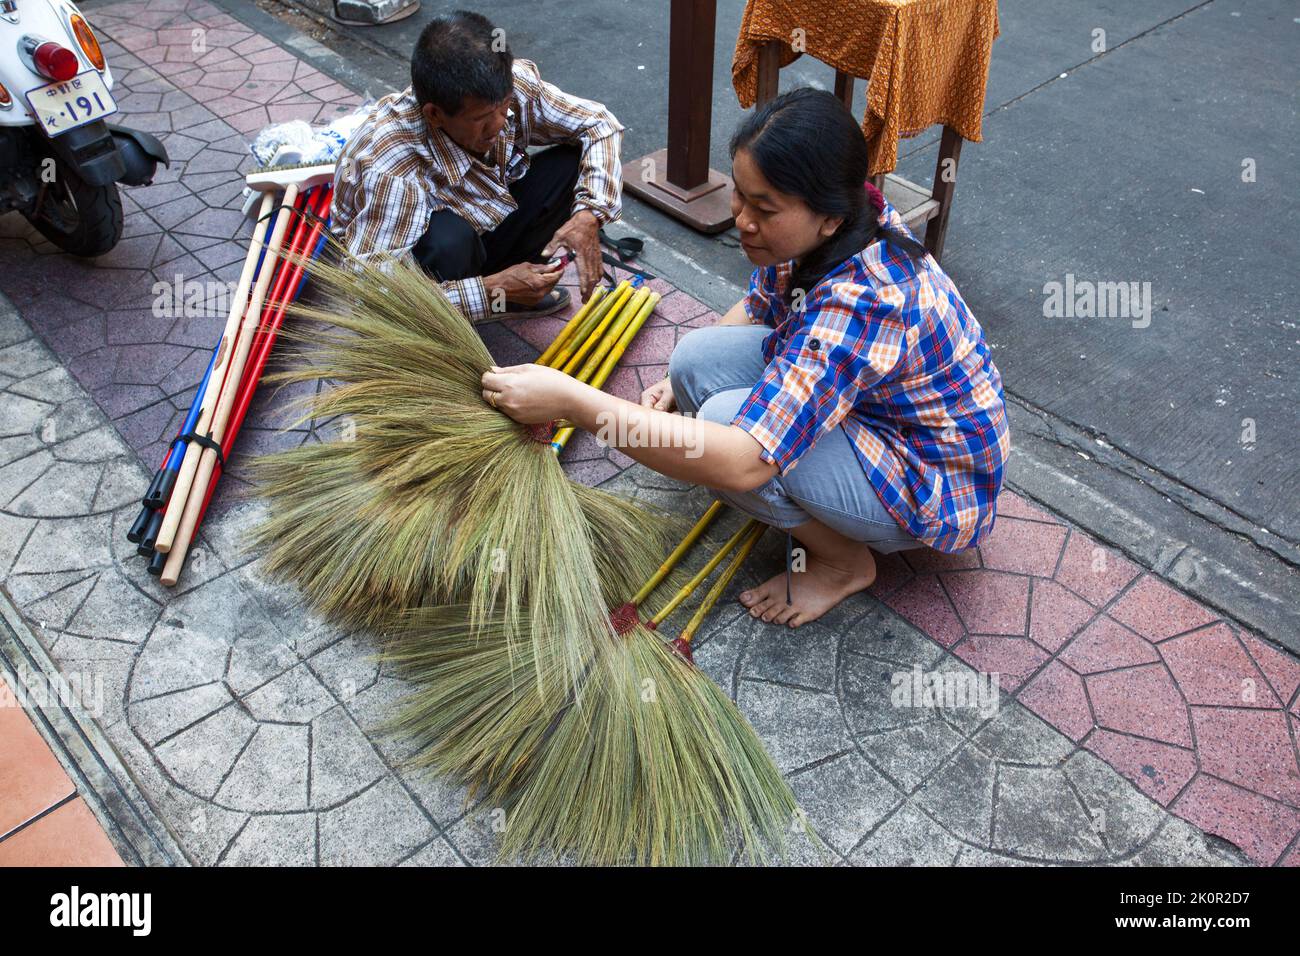 Bangkok, Thailand - December 12, 2011: Street vendor of brooms with buyer on the sidewalk in Bangkok. Evaluation of quality Stock Photo